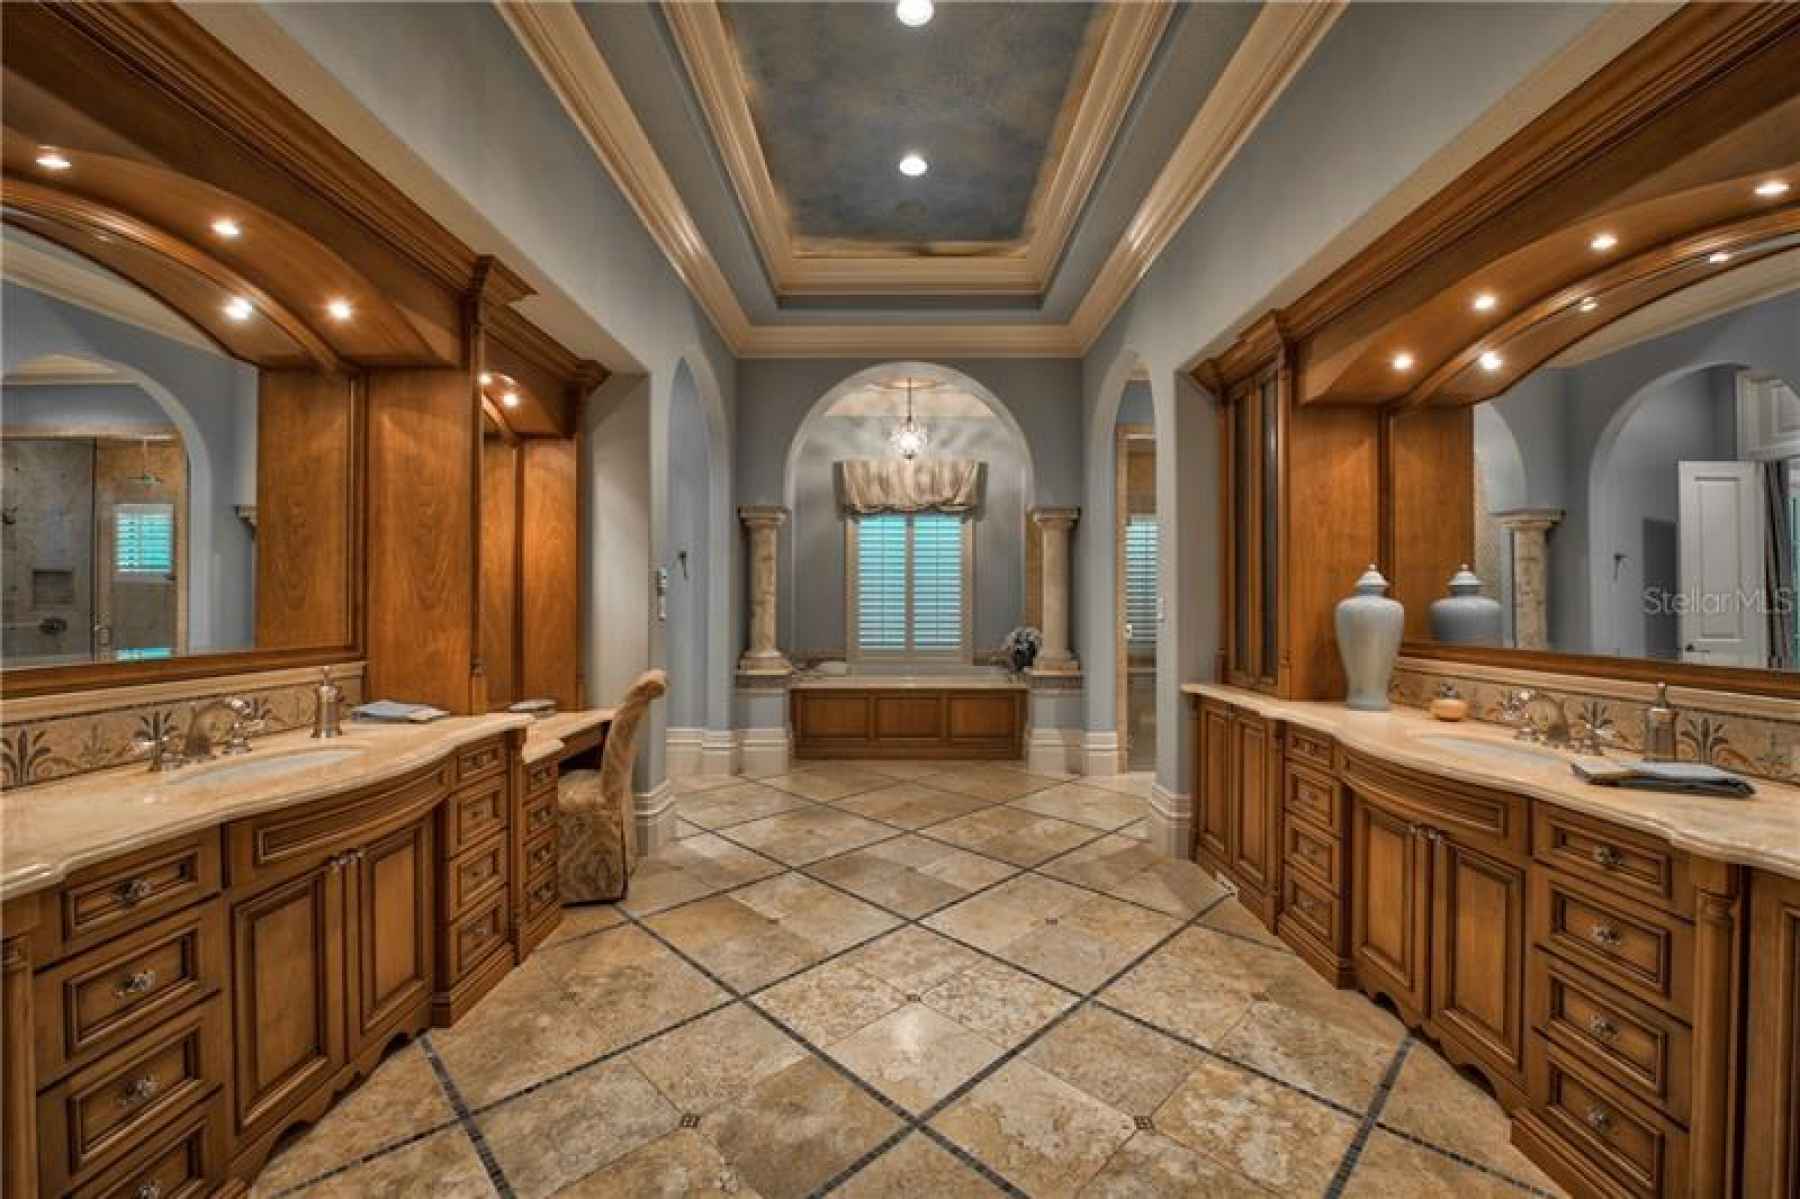 Master Bathroom with Luxurious Tile Detailing Throughout